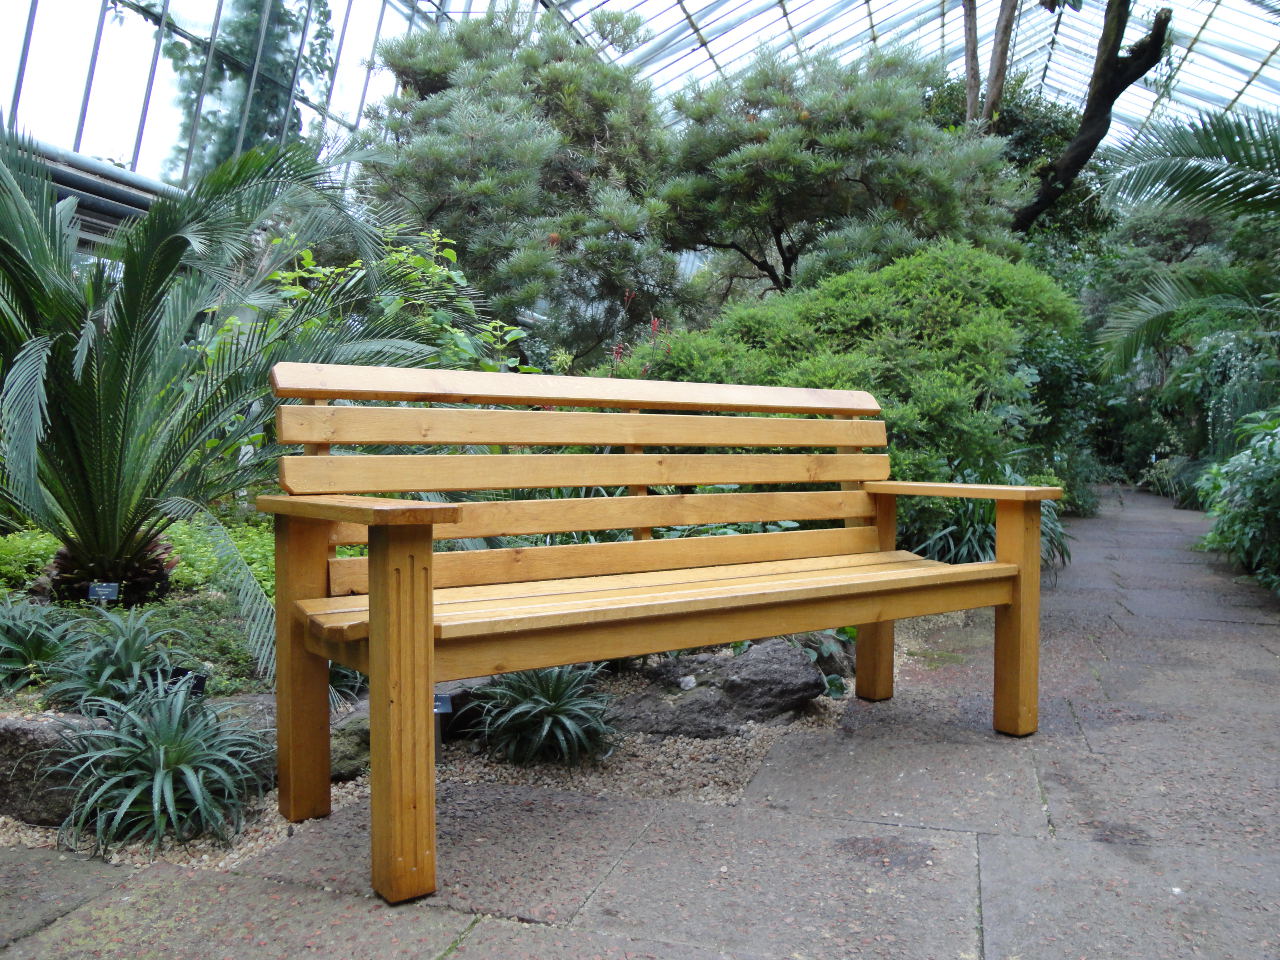 One of Our New Benches (click to enlarge)